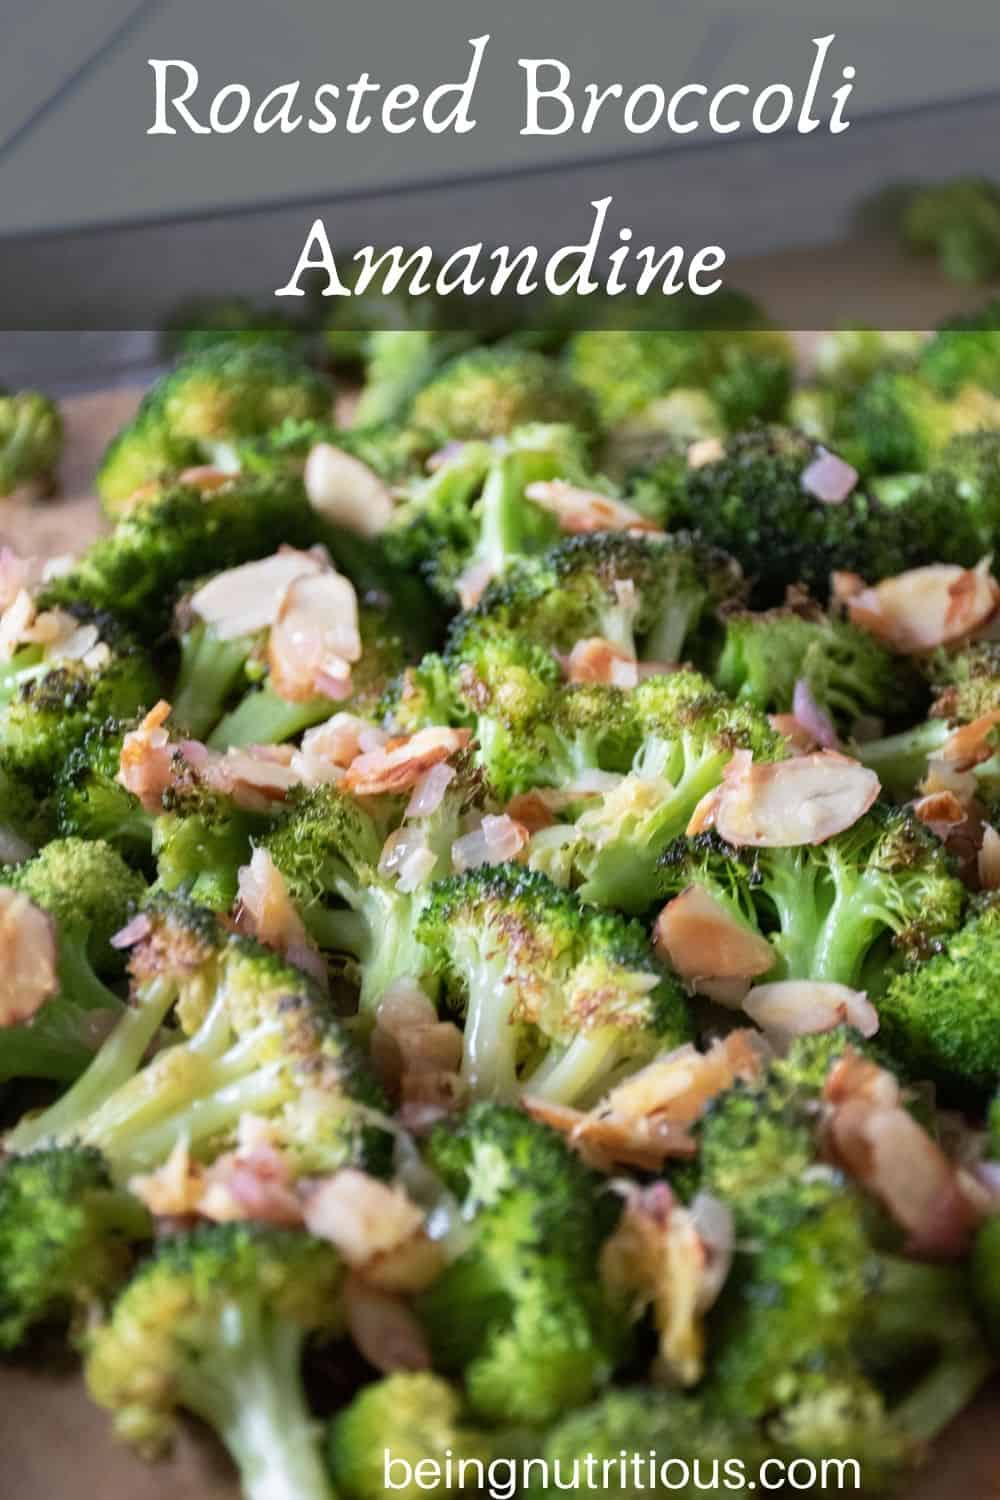 Sheet pan of roasted broccoli with almond topping. Text overlay: Roasted Broccoli Amandine.